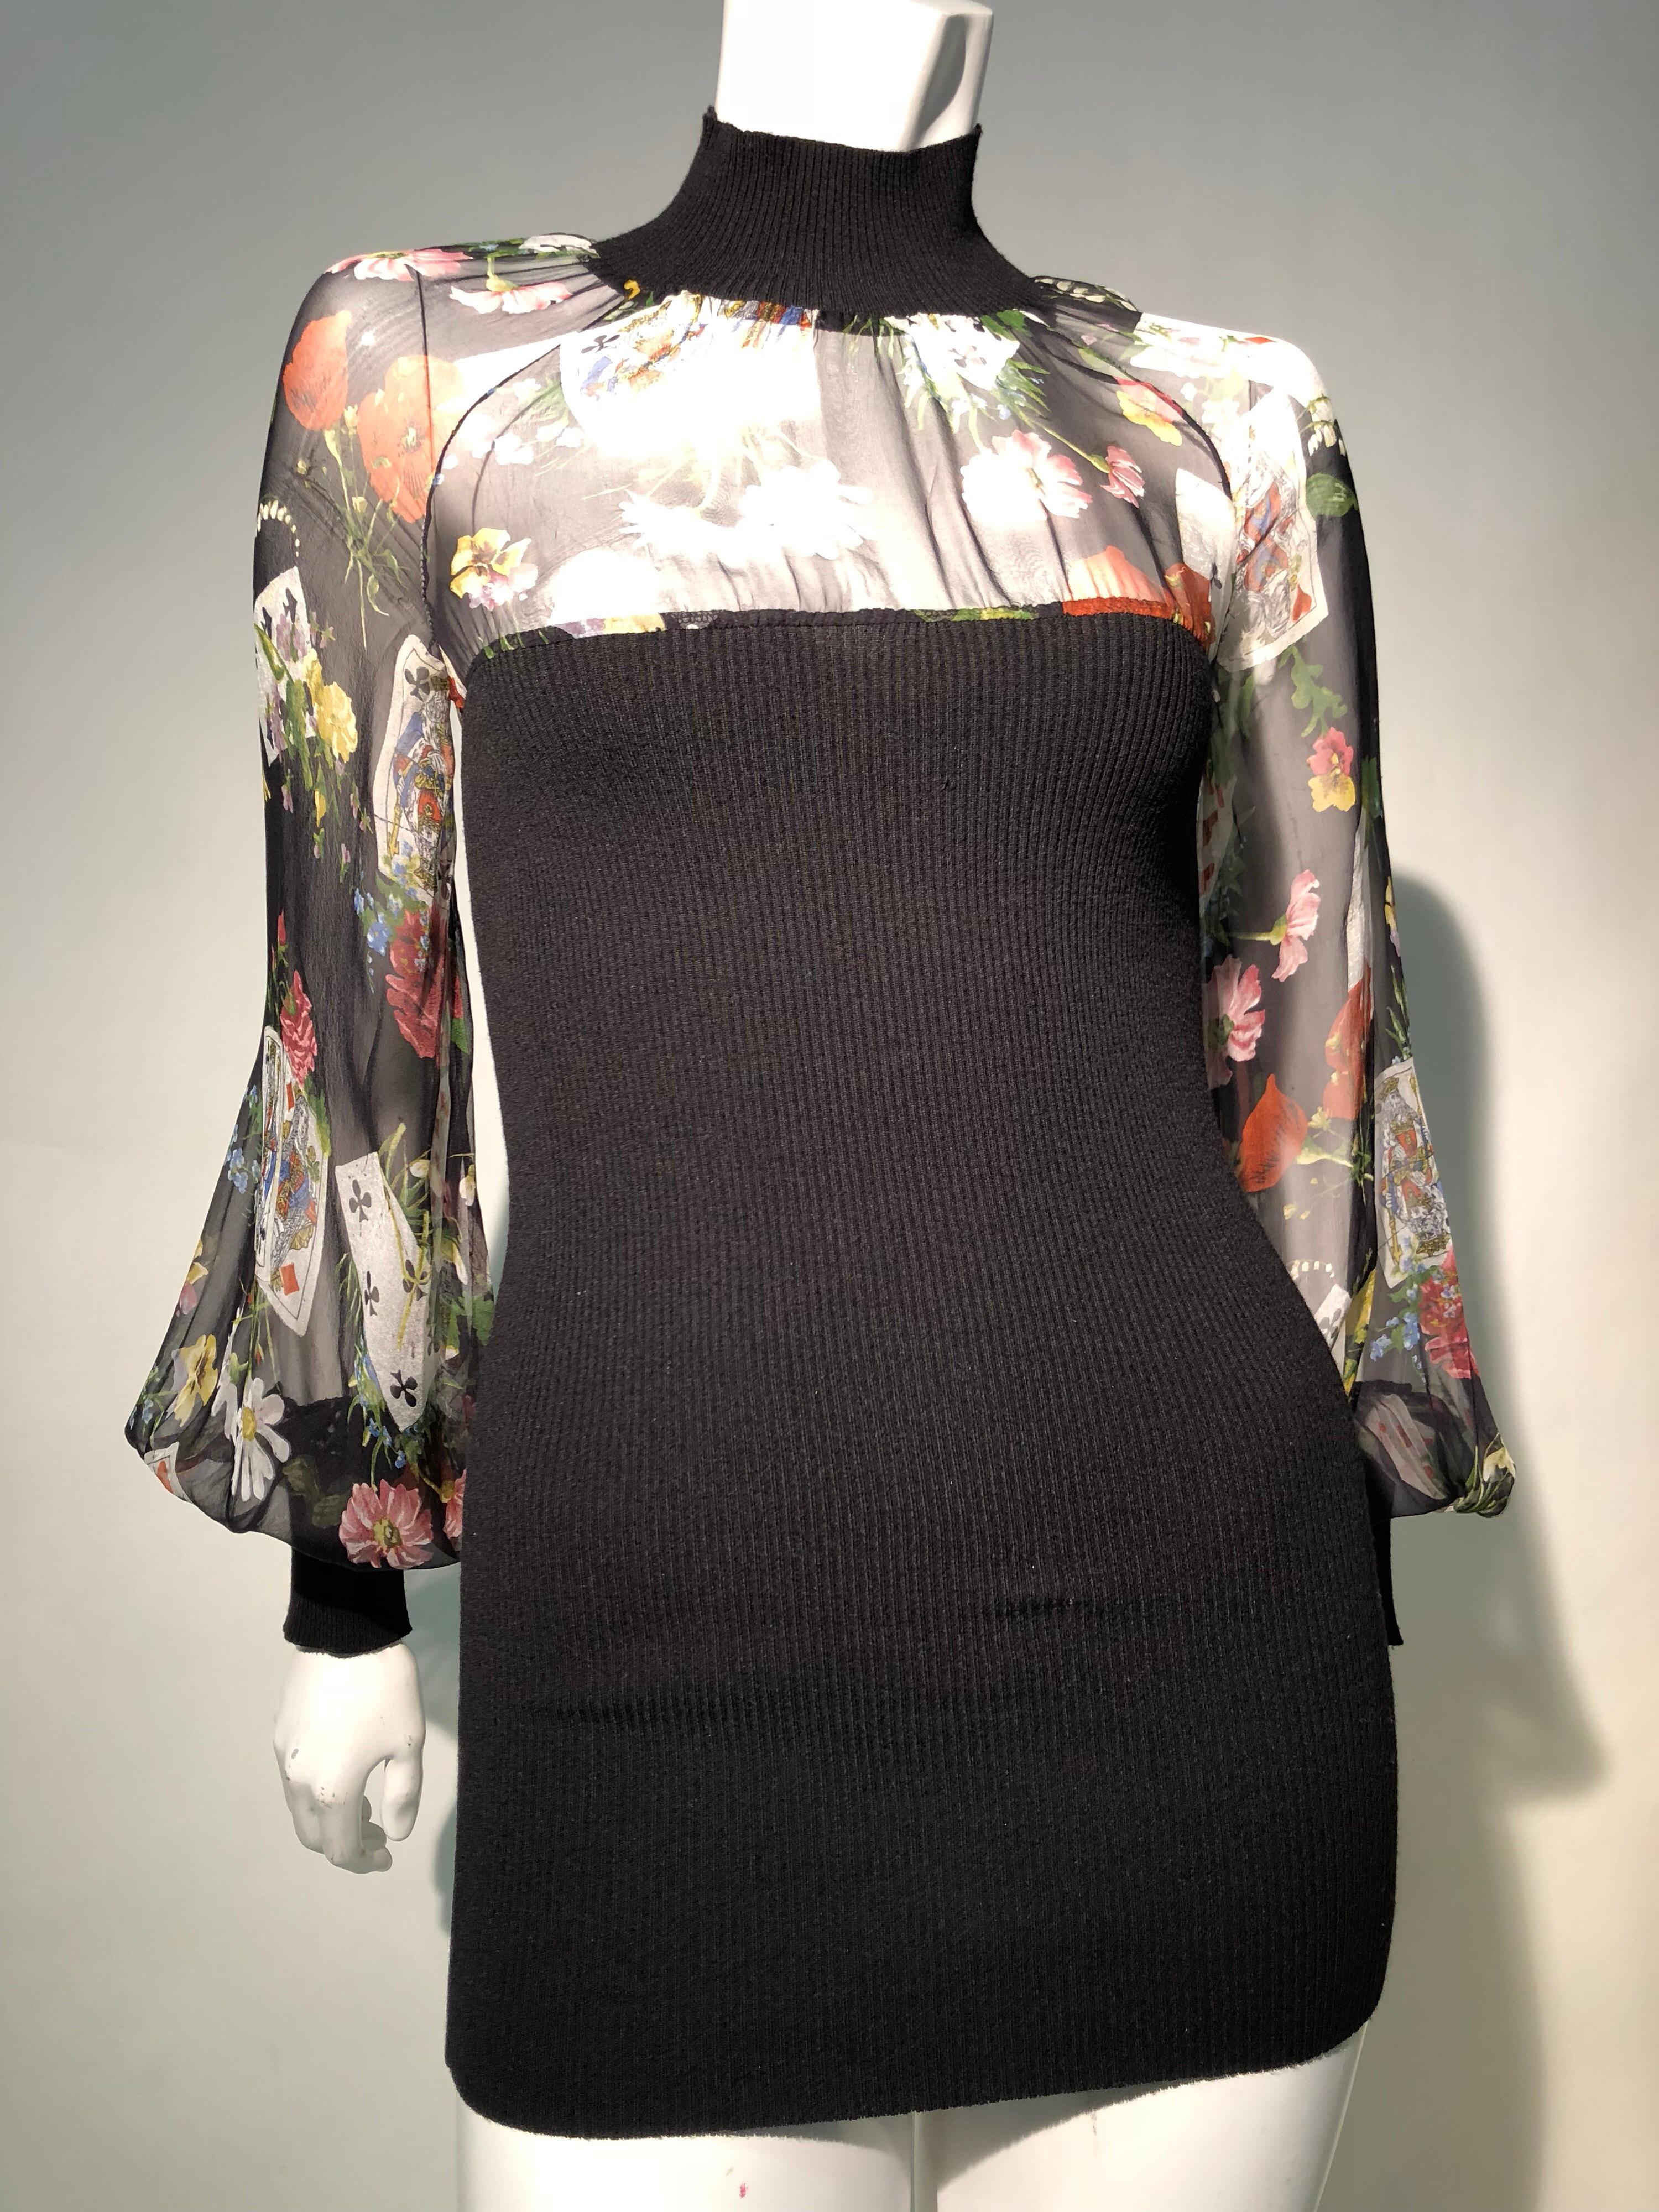 Christian Dior Black Mini Dress with Floral and Playing Card Chiffon Top, 1990s 3